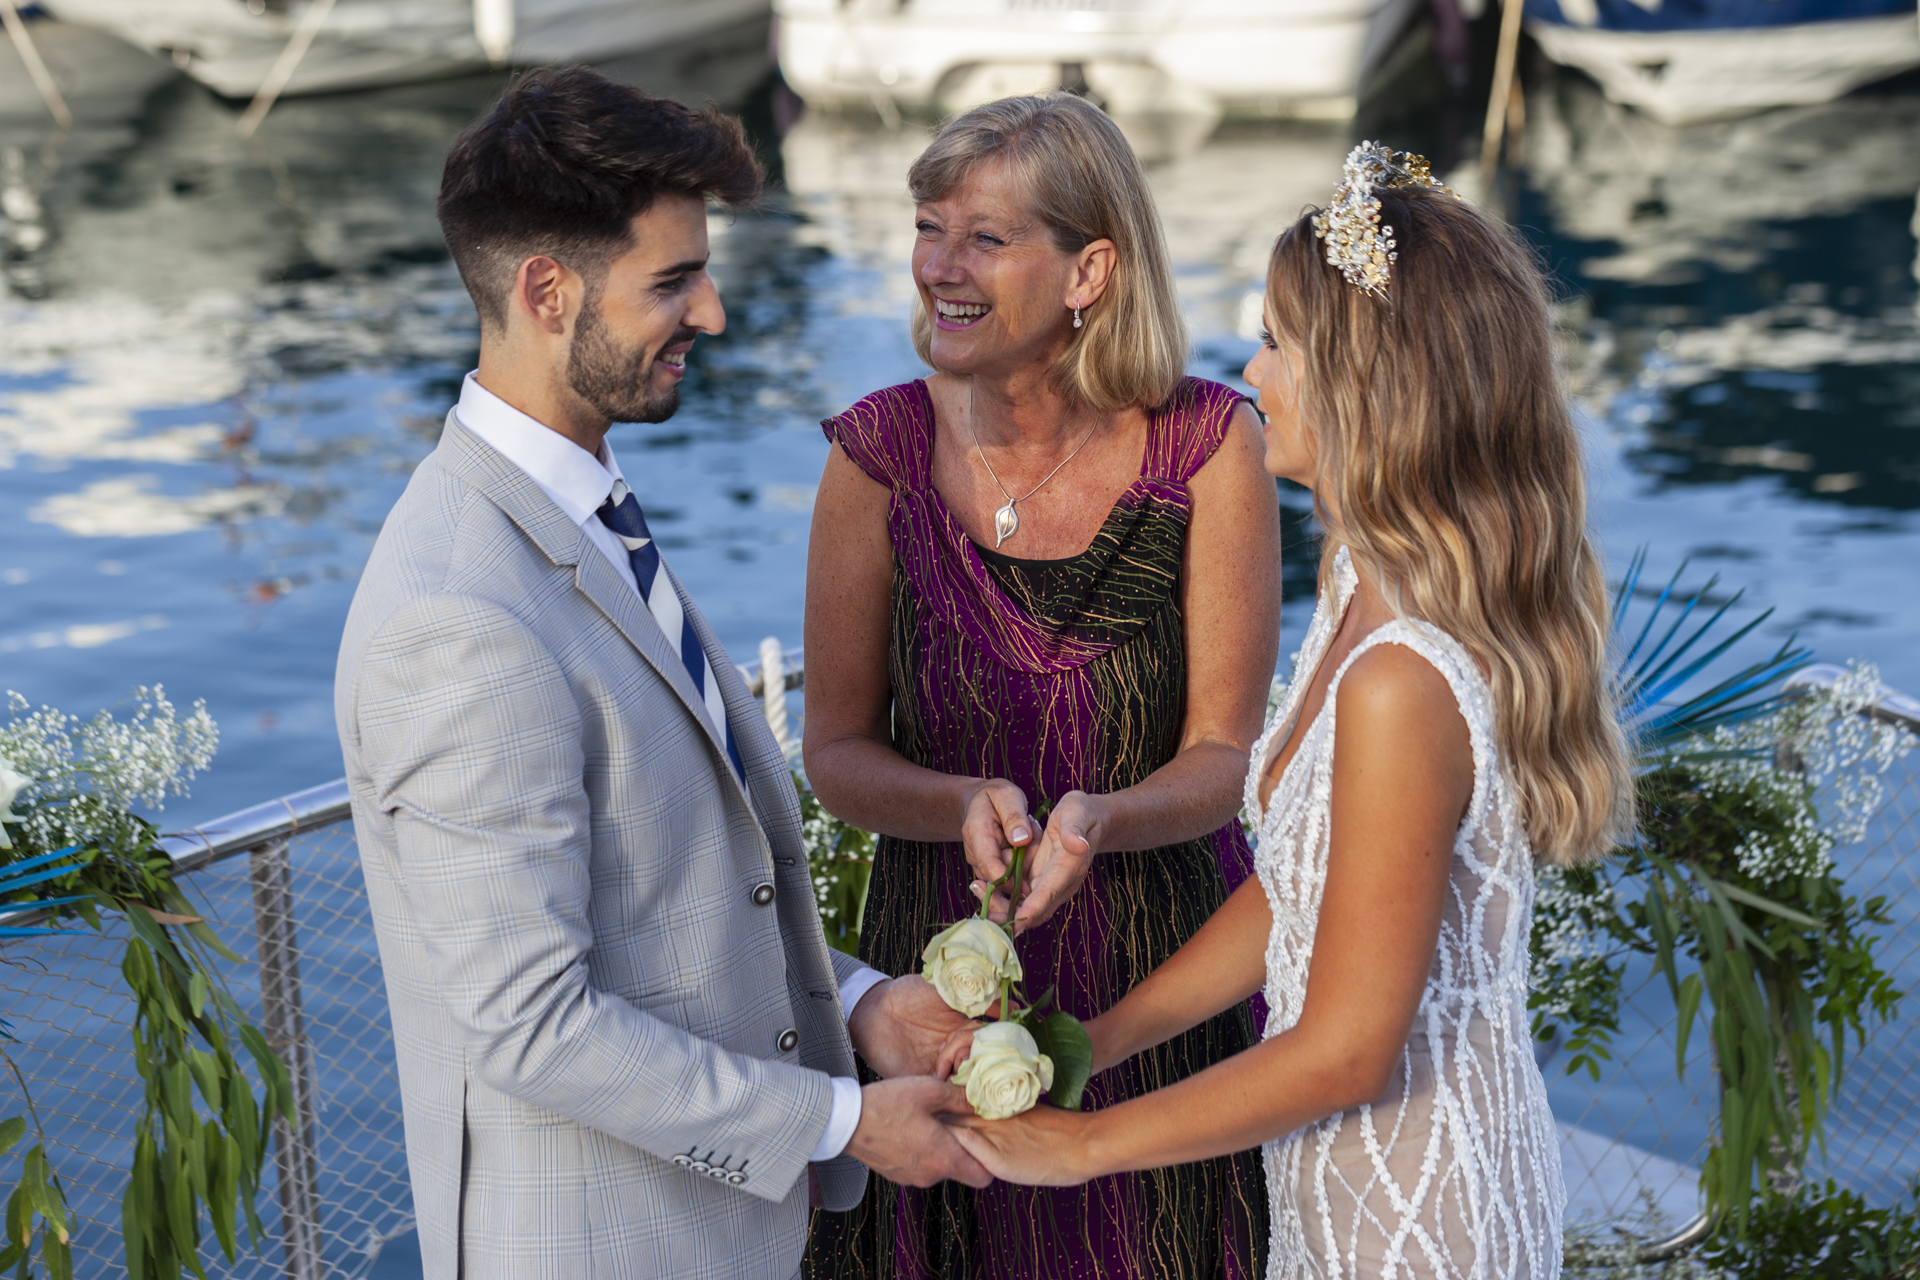 Rose ceremony at a boat wedding elopement ceremony